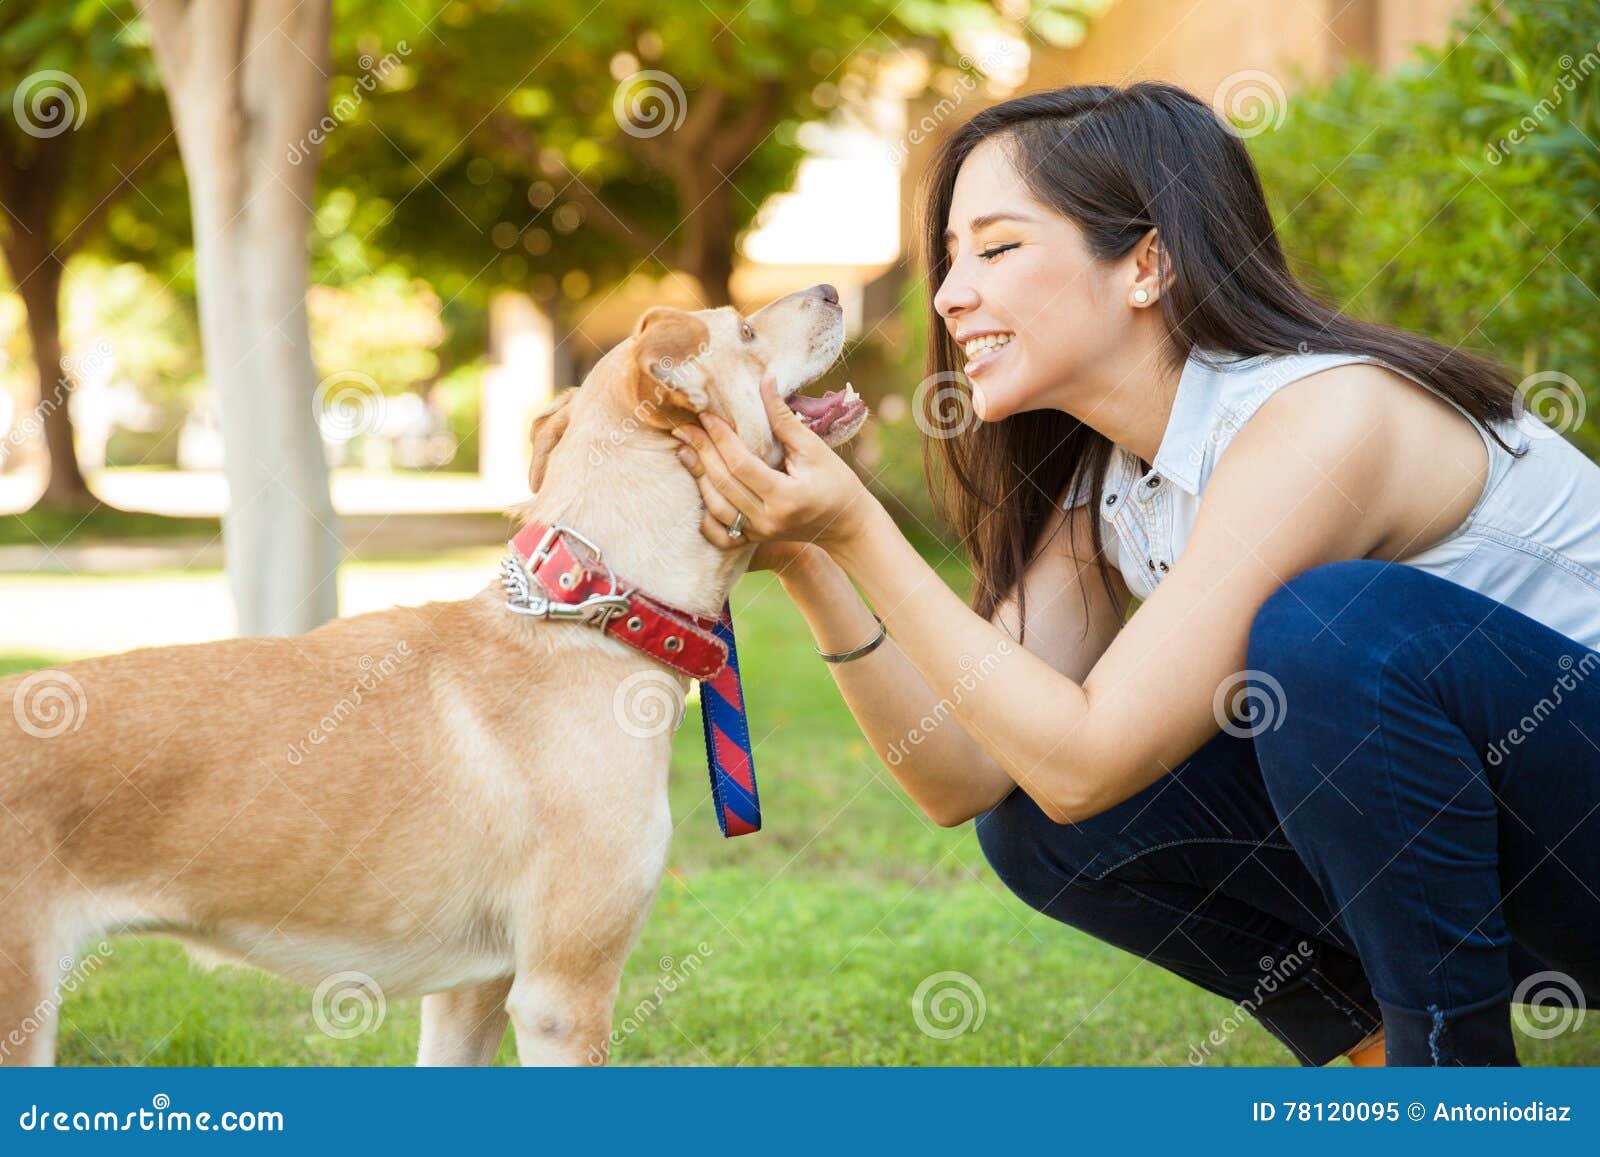 pretty woman about to kiss her dog